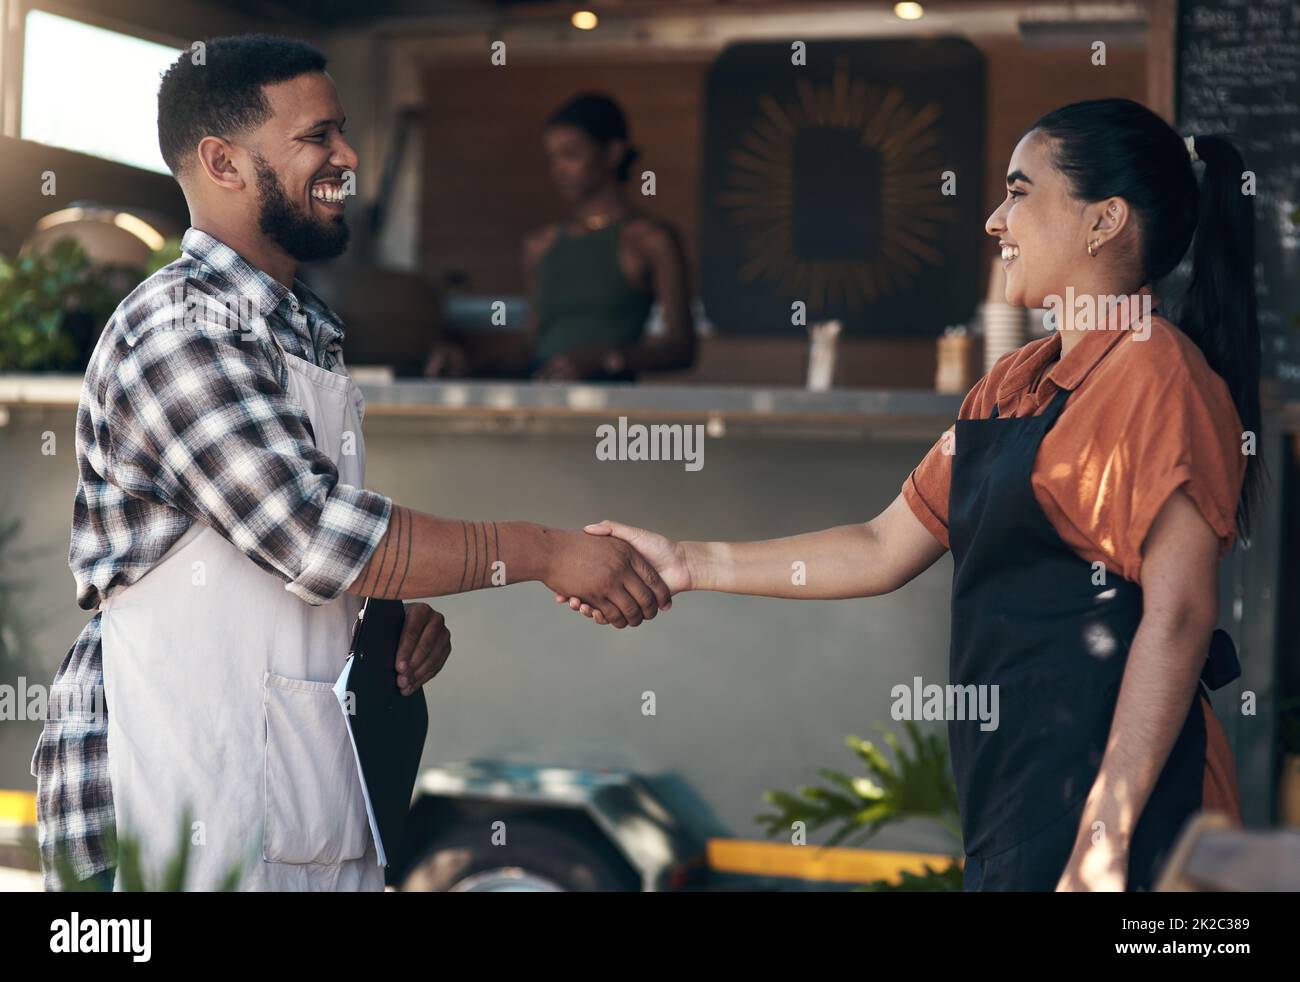 Welcome to the team. Shot of two young restaurant owners standing outside together and shaking hands. Stock Photo